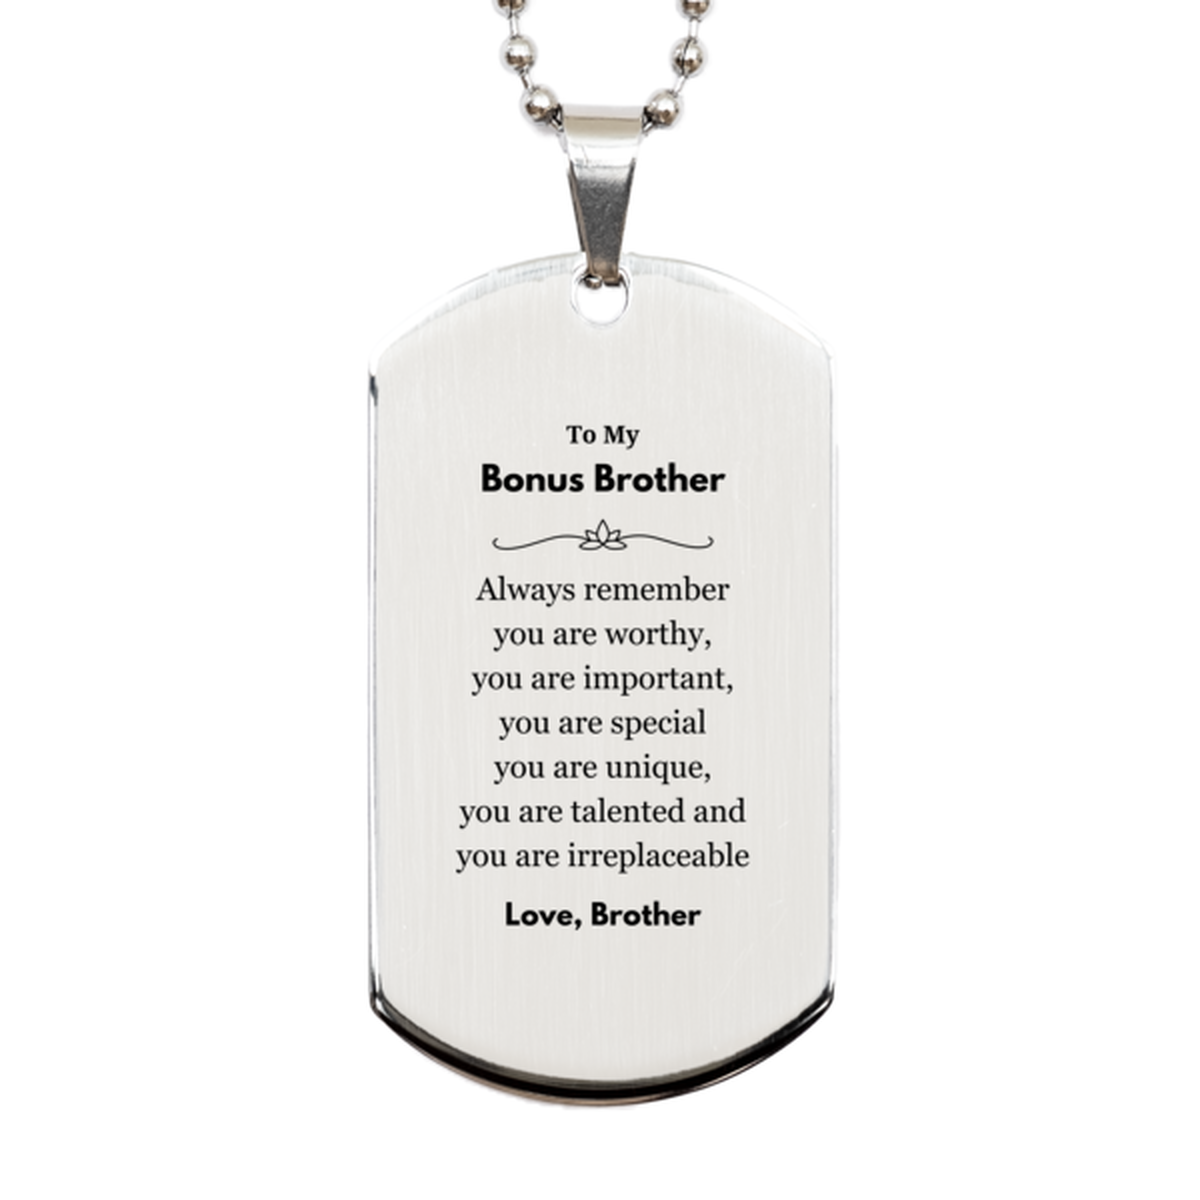 Bonus Brother Birthday Gifts from Brother, Inspirational Silver Dog Tag for Bonus Brother Christmas Graduation Gifts for Bonus Brother Always remember you are worthy, you are important. Love, Brother